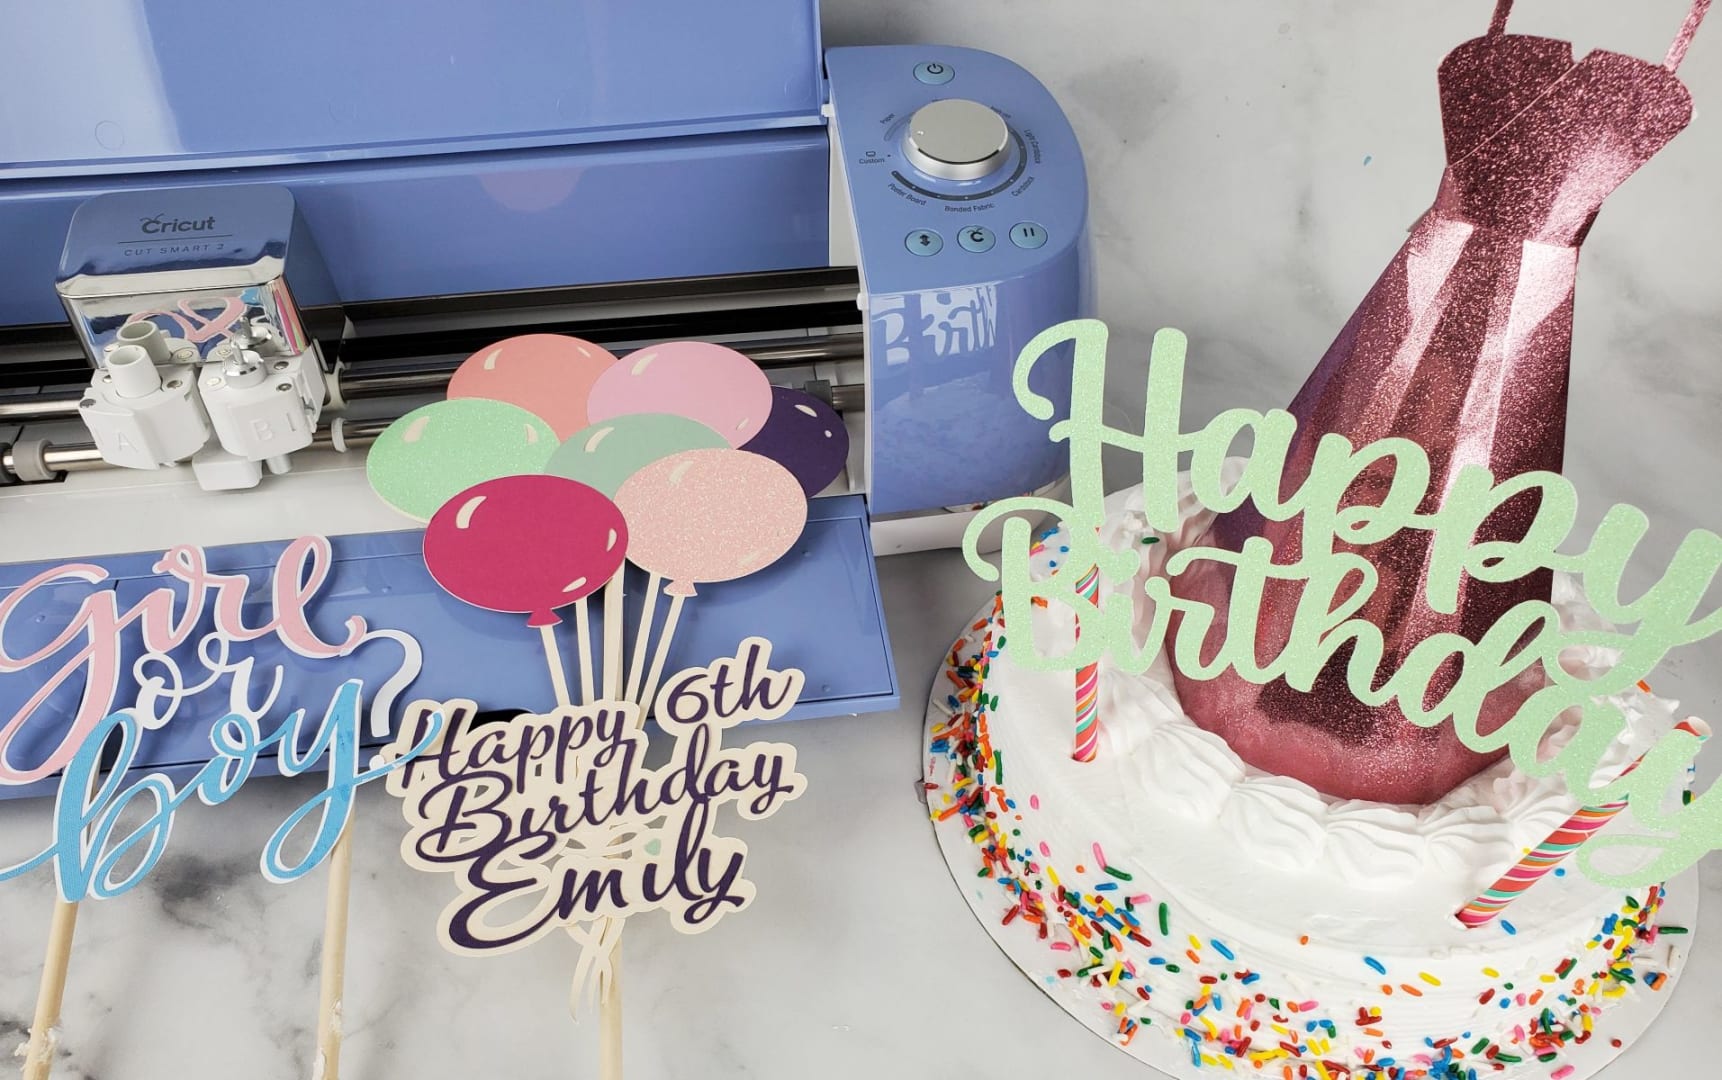 Cricut Cake Toppers: How to Make a Cake Topper with Cricut! - Leap of Faith  Crafting